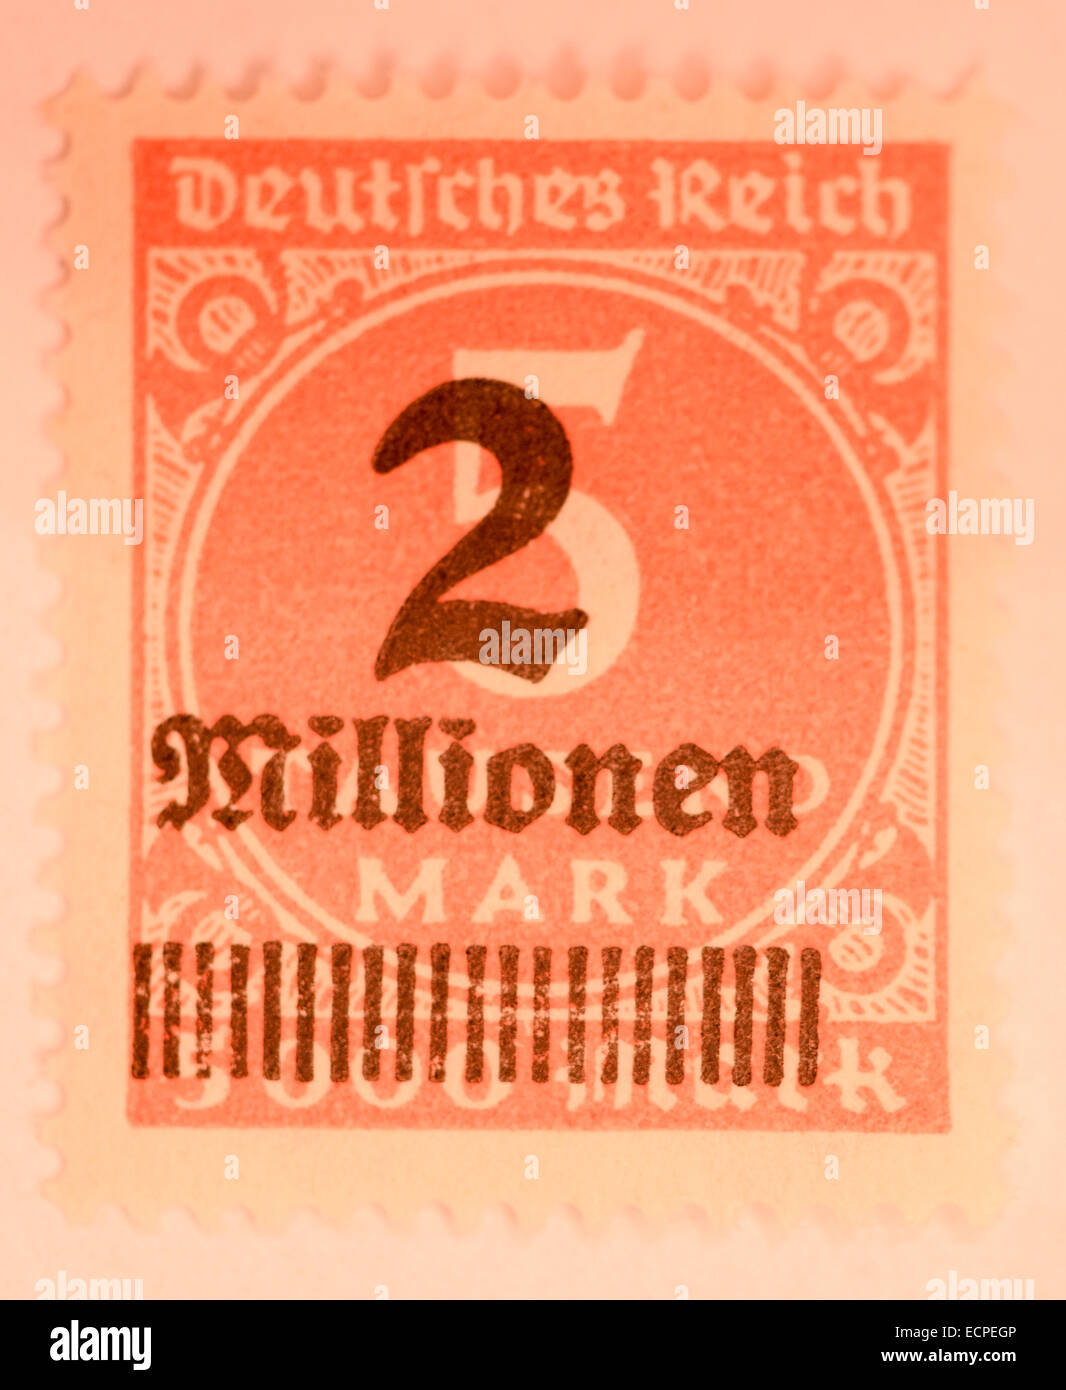 old german inflation stamps Stock Photo